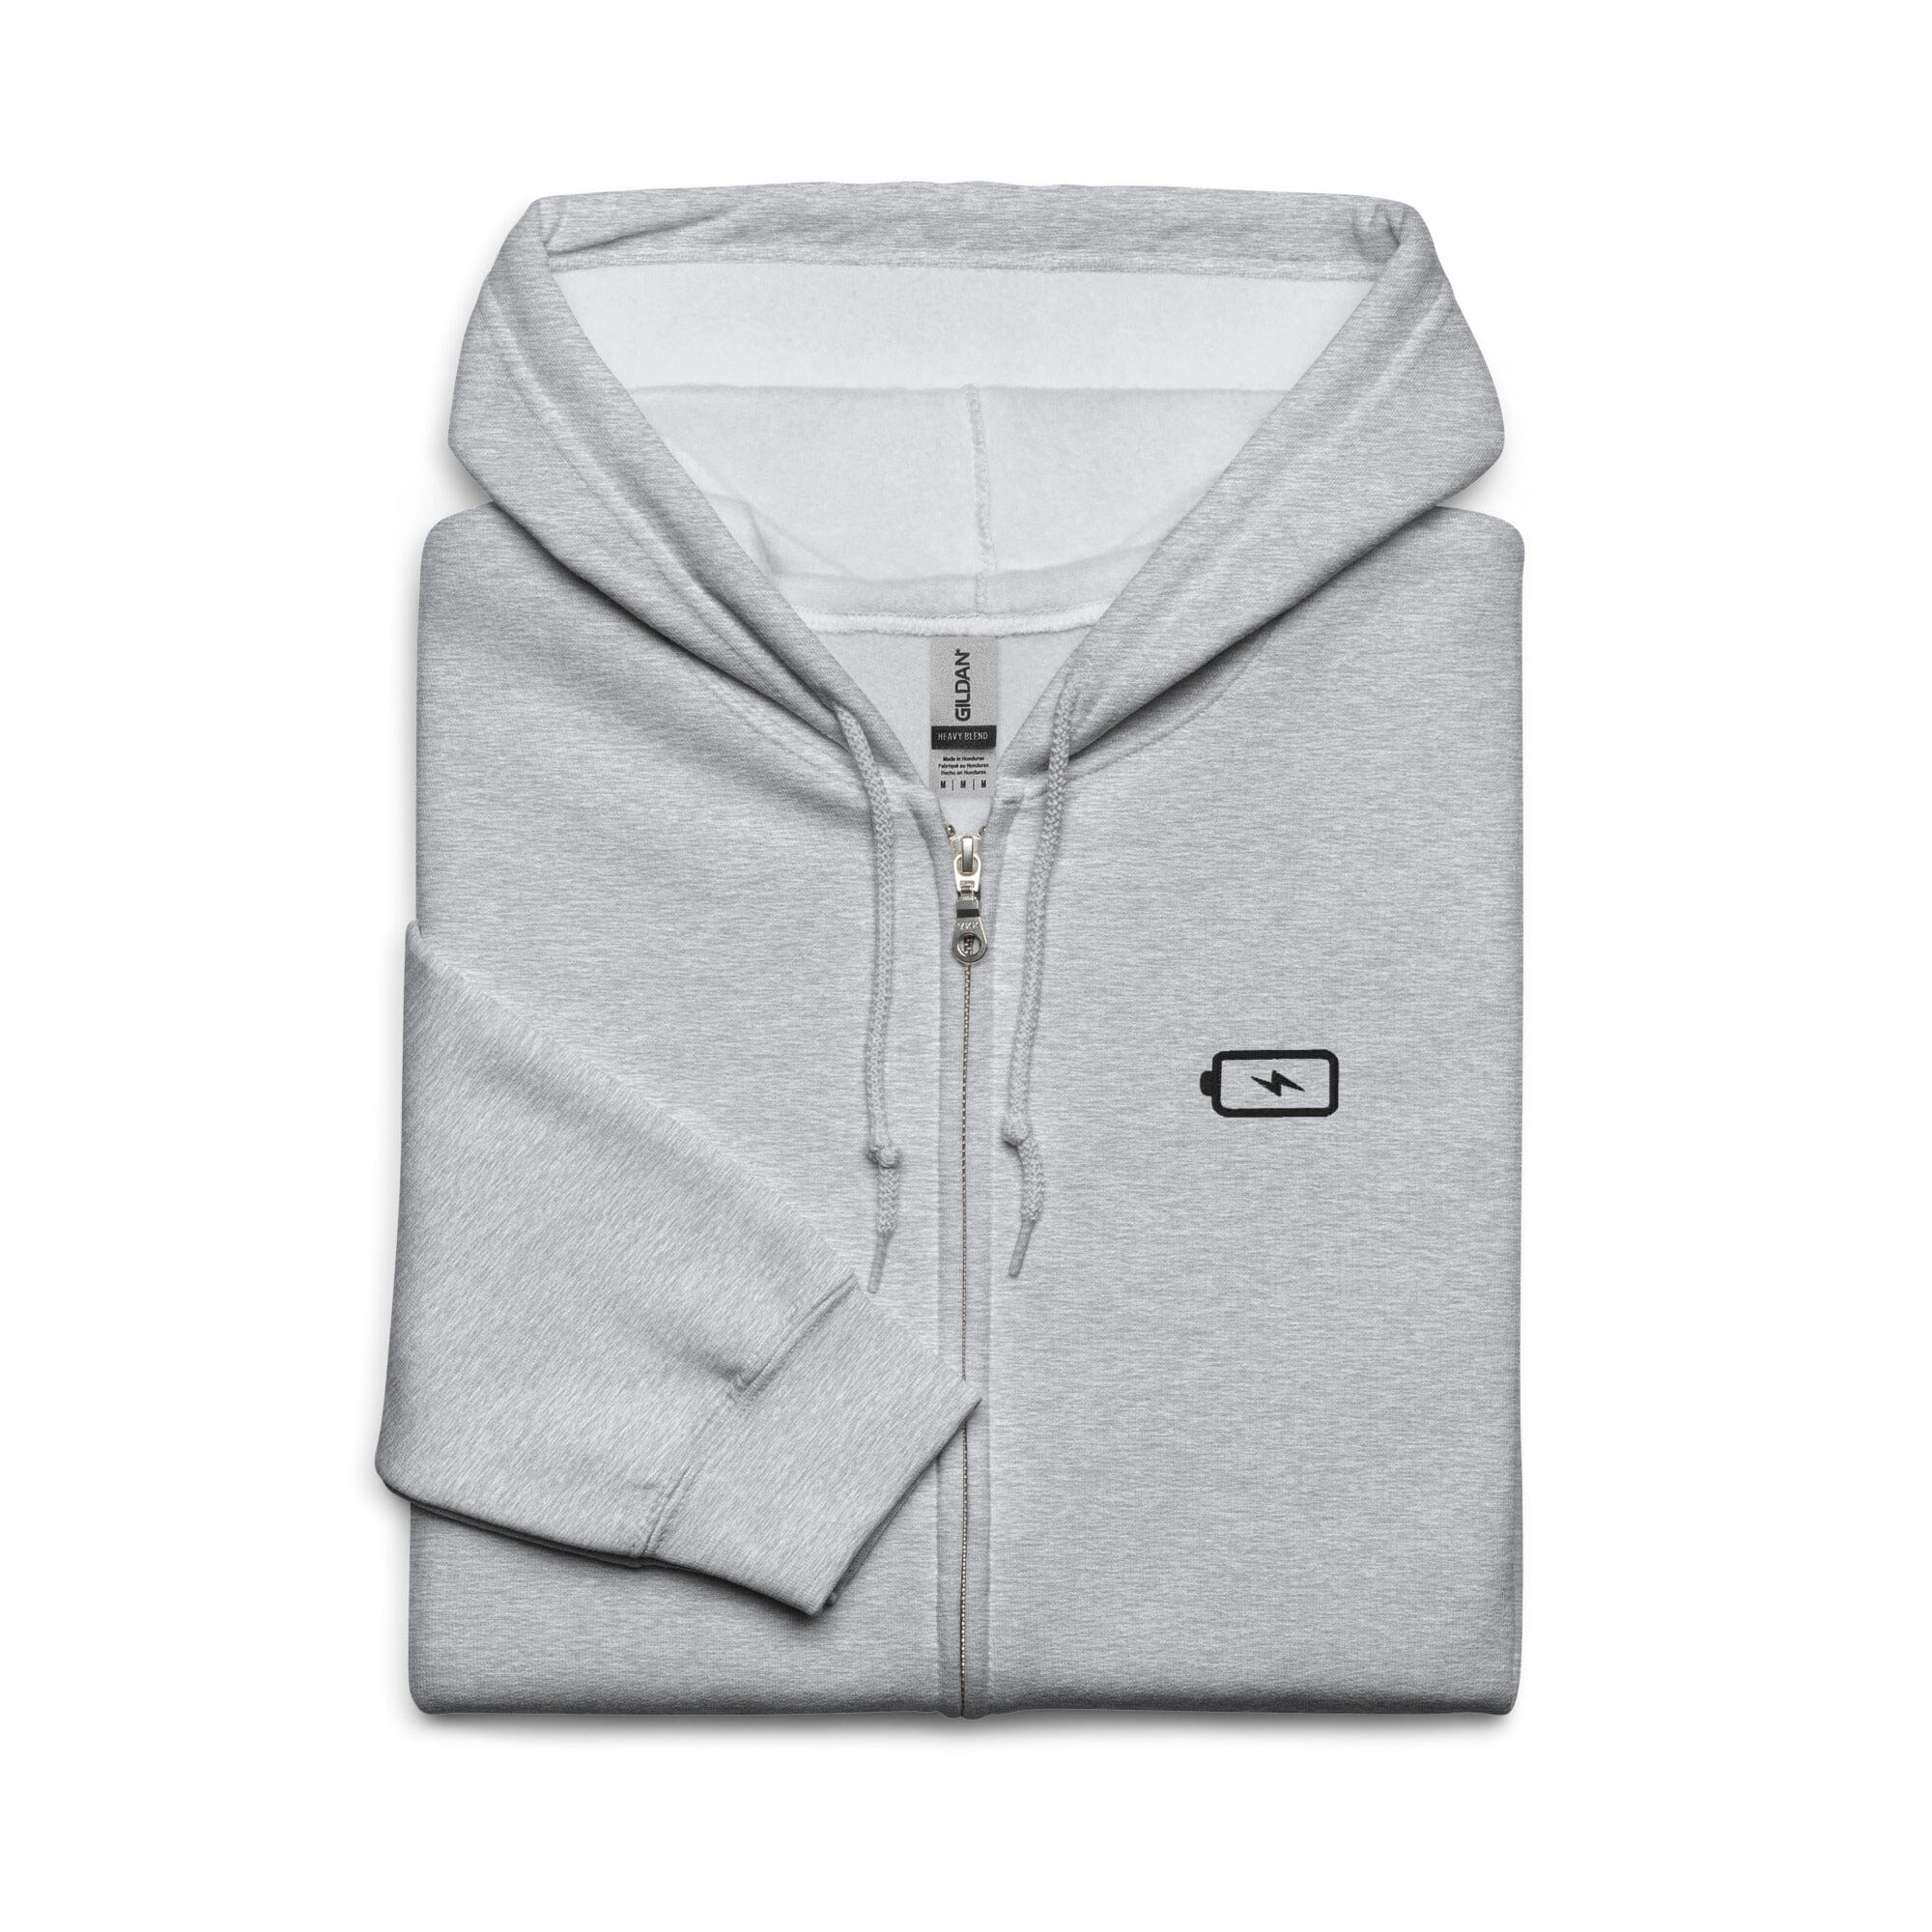 Taking Time to Recharge | Embroidered Unisex heavy blend zip hoodie | Gamer Affirmations Hoodies Threads & Thistles Inventory Sport Grey S 